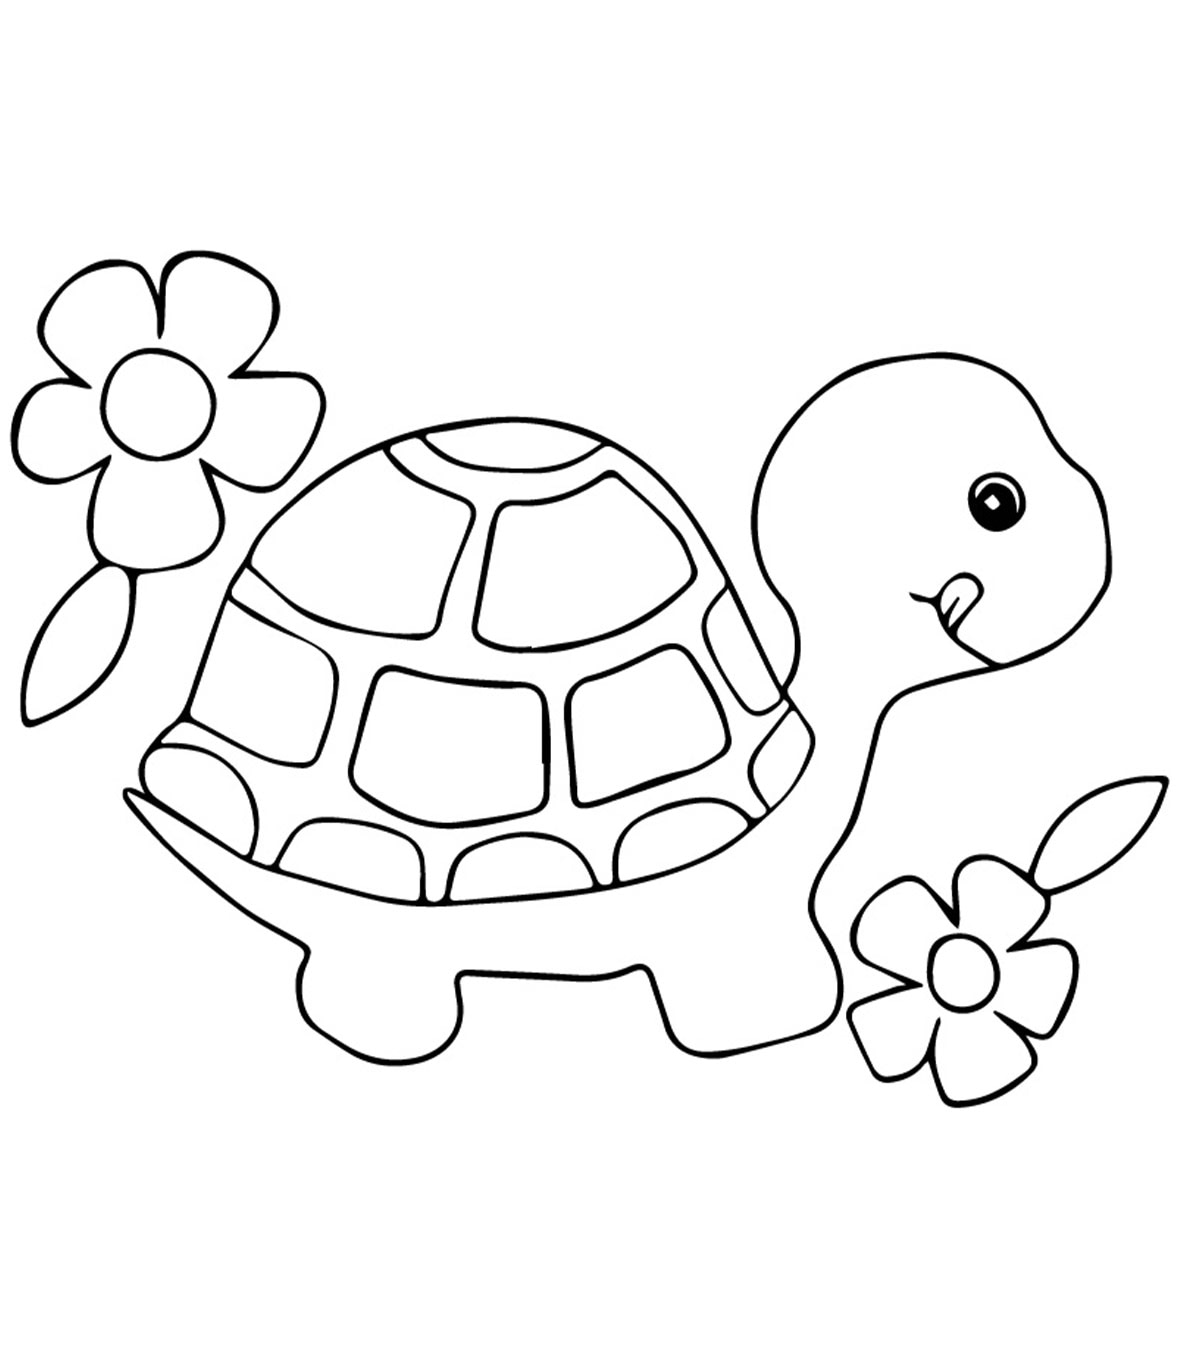 Download Turtle Coloring Pages For Kids Coloring Export 115 Role